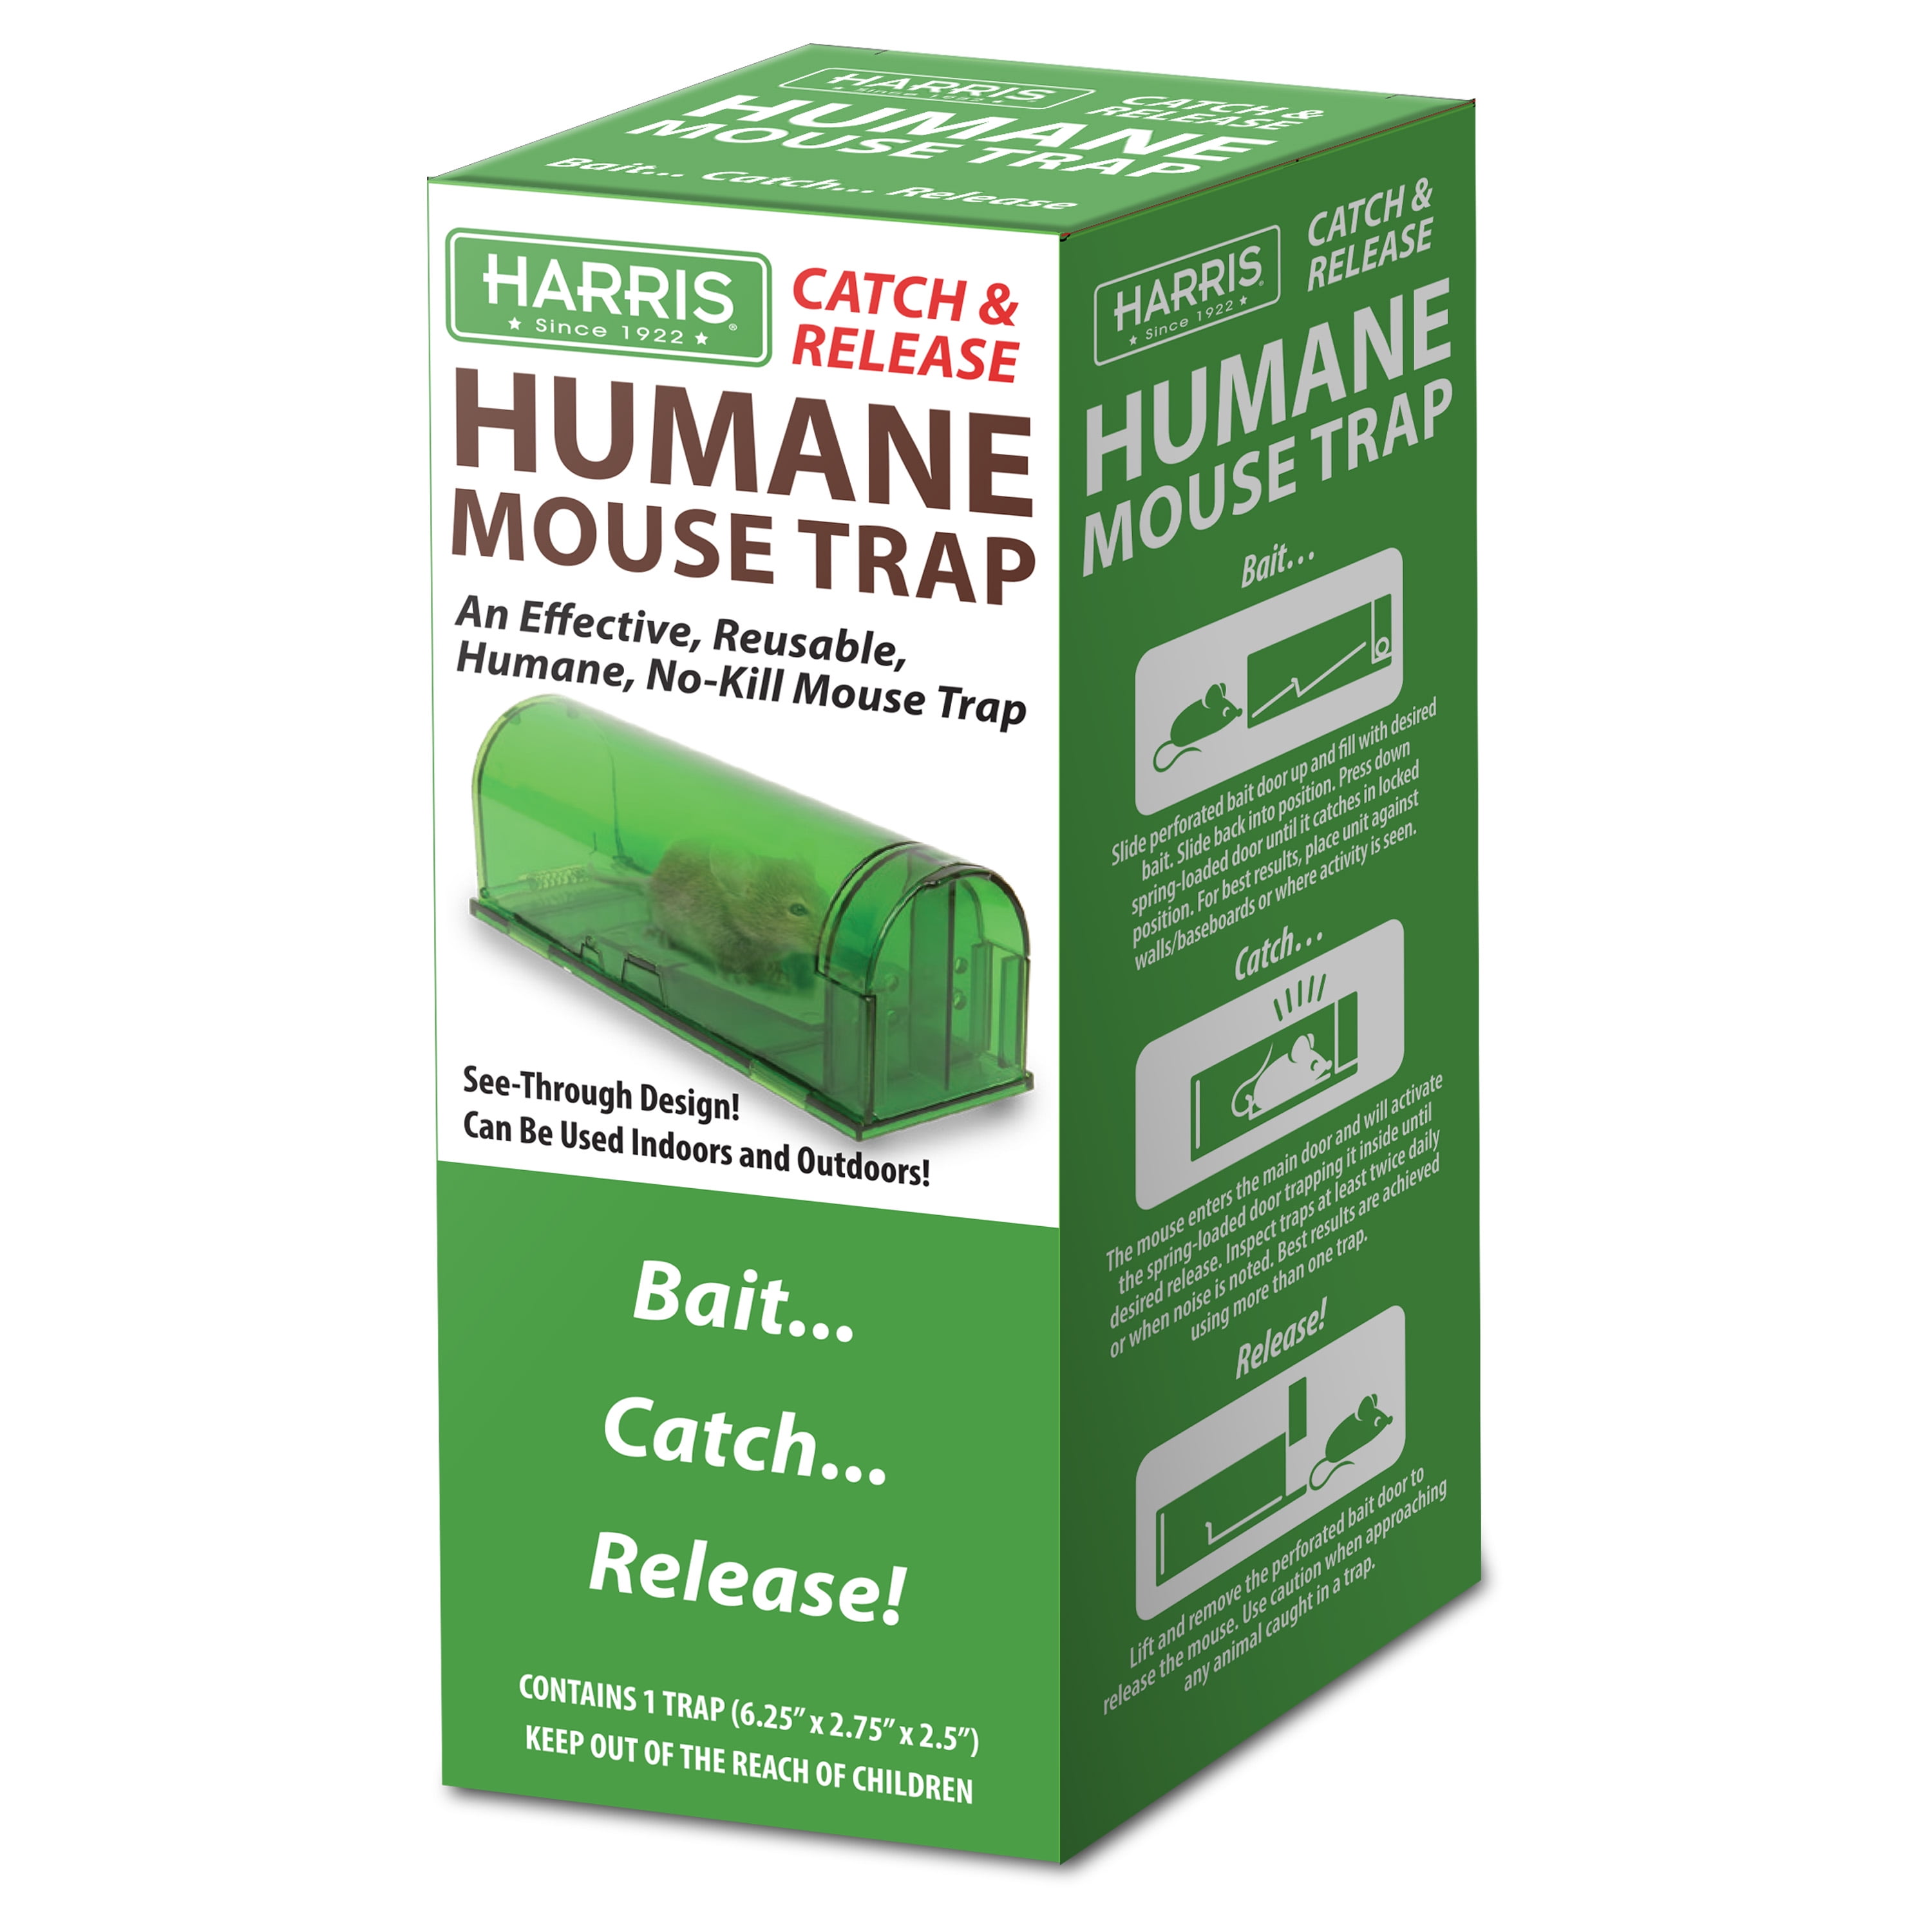 HARRIS Humane Mouse Trap - Catch & Release